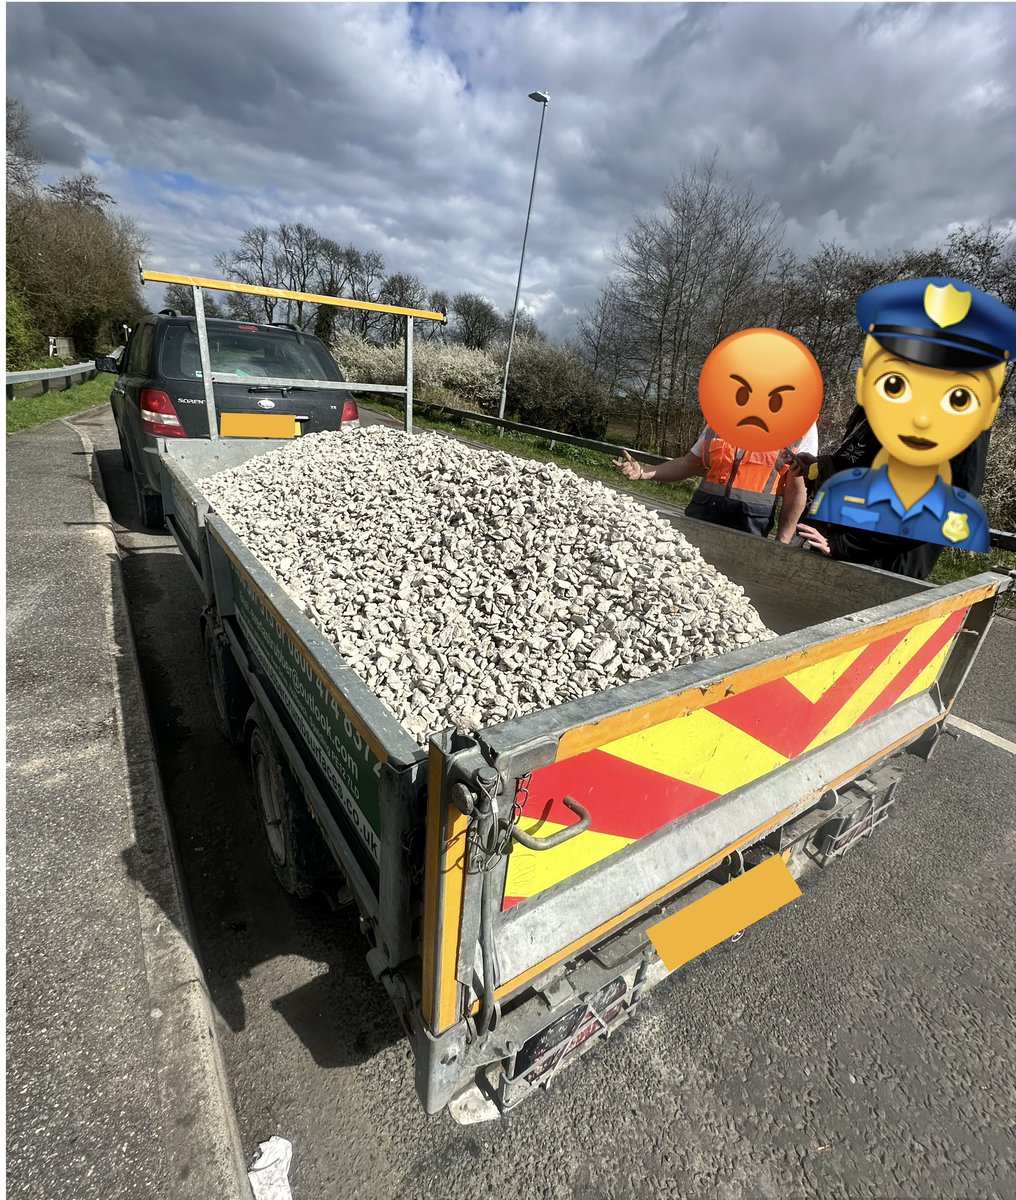 #RPU stopped this insecure load in #SKEGNESS earlier today. Driver had a sheet to cover the load in the boot but was “too busy” to apply it before setting off. TOR issued and load secured correctly. #ShowUsYourLoad